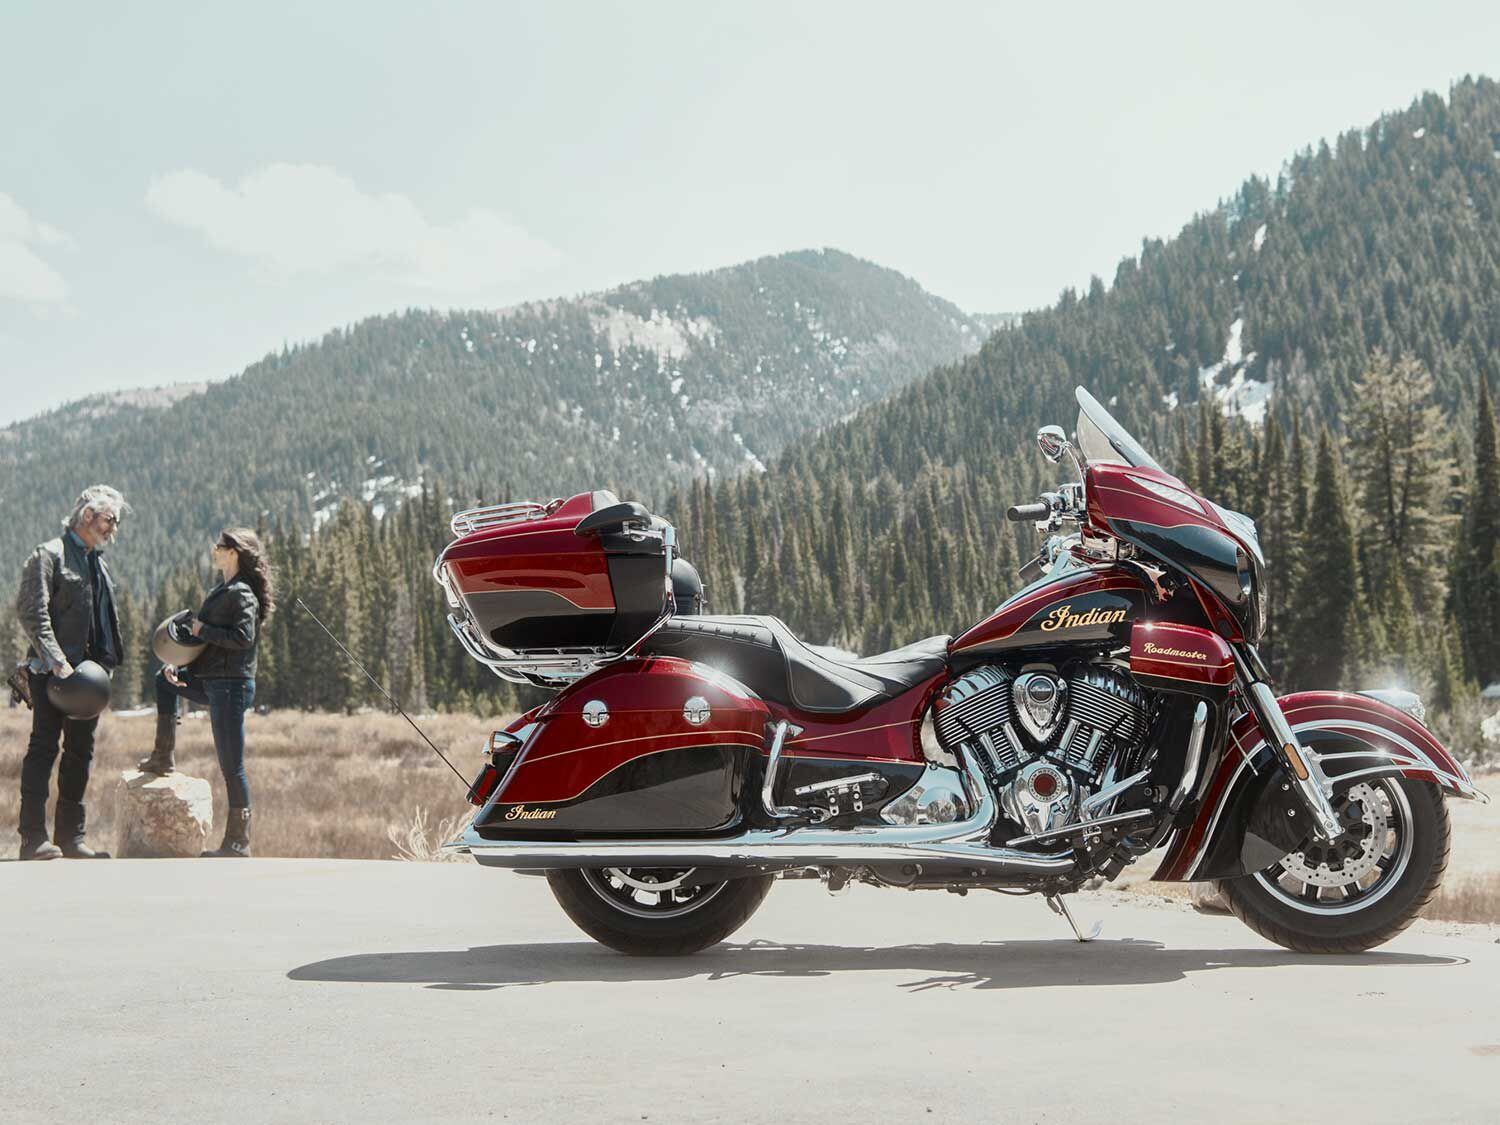 She’s quite the looker. The 2019 Roadmaster Elite heaps on Indian’s tech and luxury comfort features in a full-dress limited-edition package.